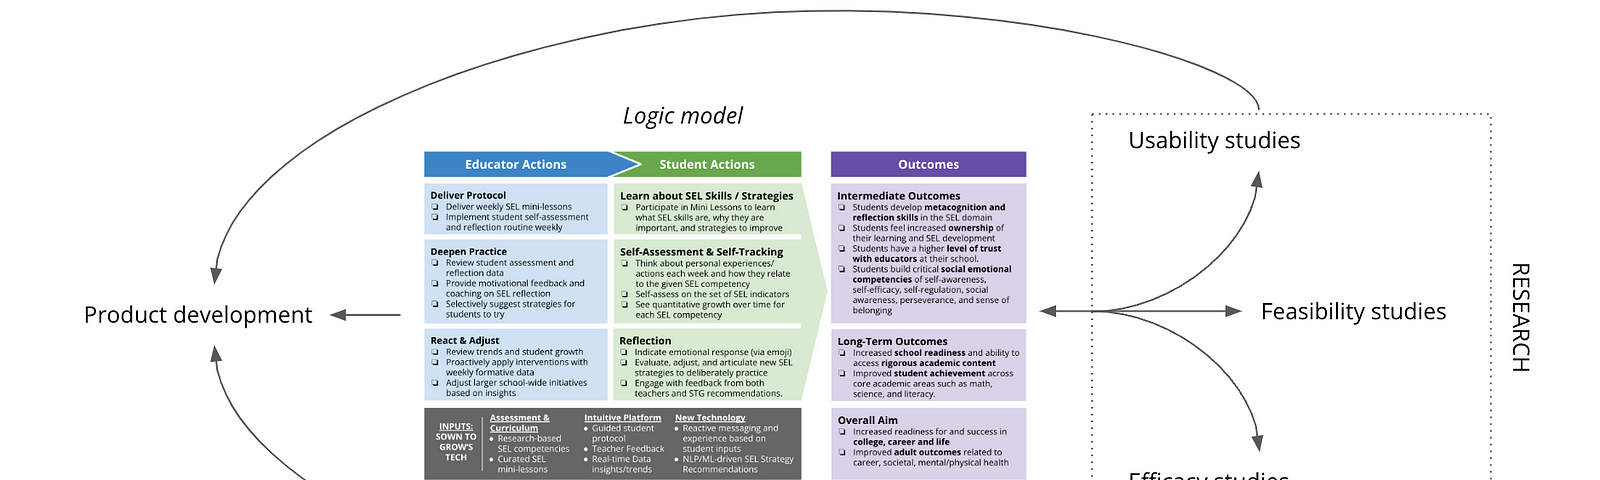 The logic model is in the center of the graphic, with an arrow pointing out from the left side to connect to product development. Usability studies, feasibility studies, and efficacy studies are on the right side of the logic model, in that order from top to bottom, in a box labeled research. Arrows connect the logic model to each of these study types. Arrows wrap around the chart to show how usability and efficacy studies inform product development.